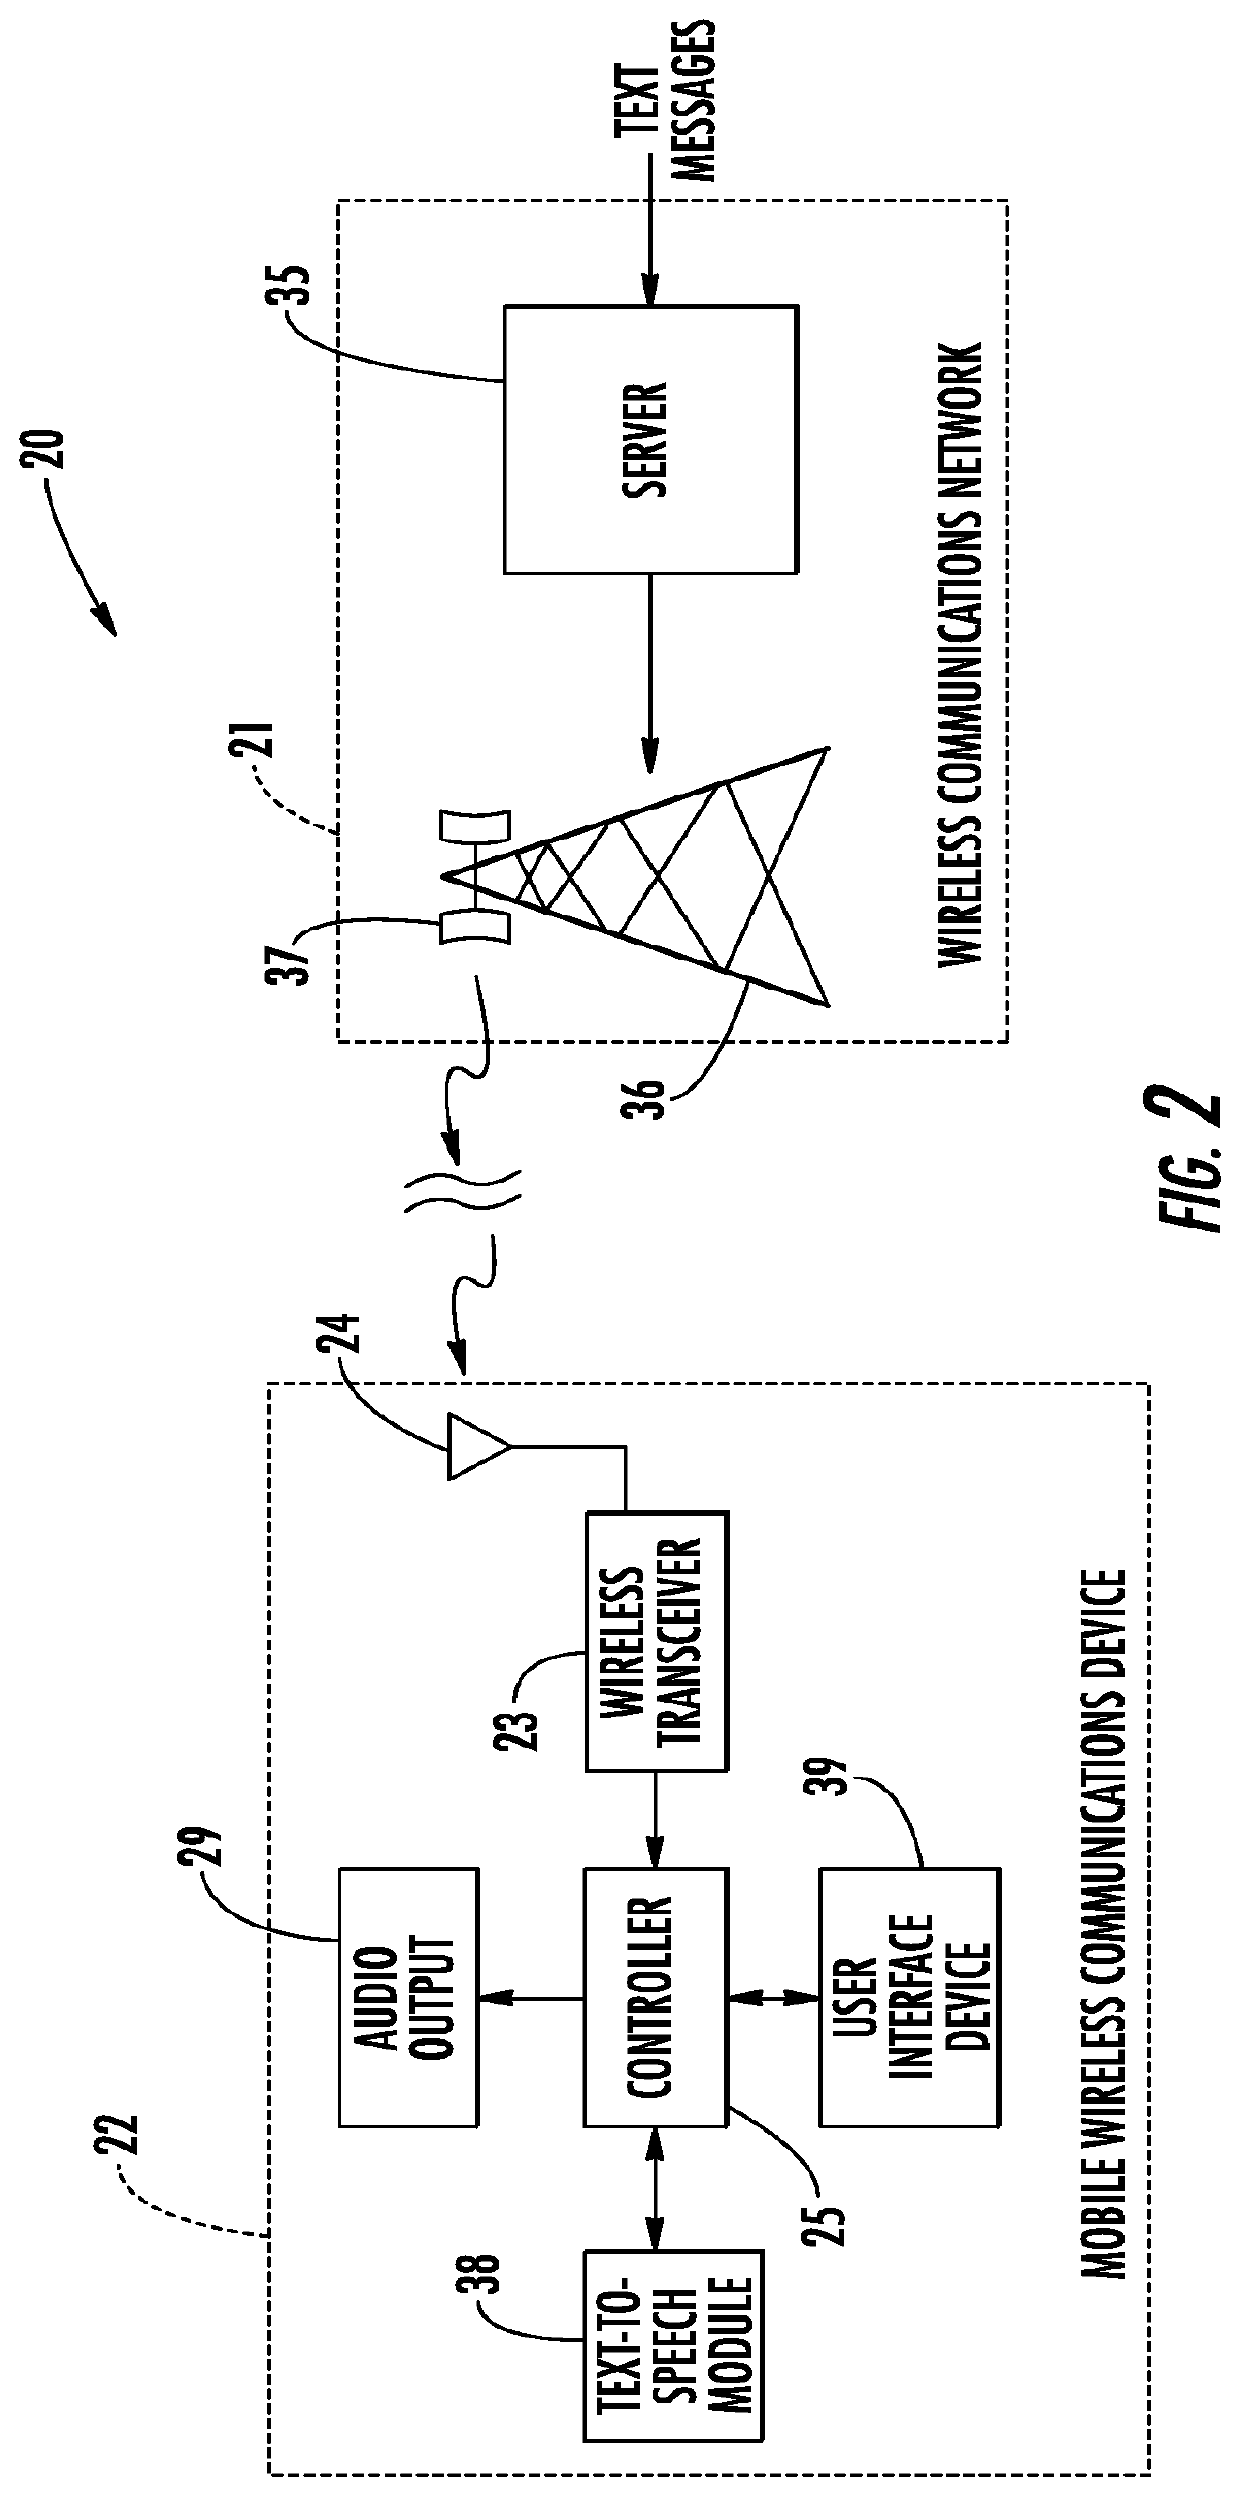 Communications system providing automatic text-to-speech conversion features and related methods